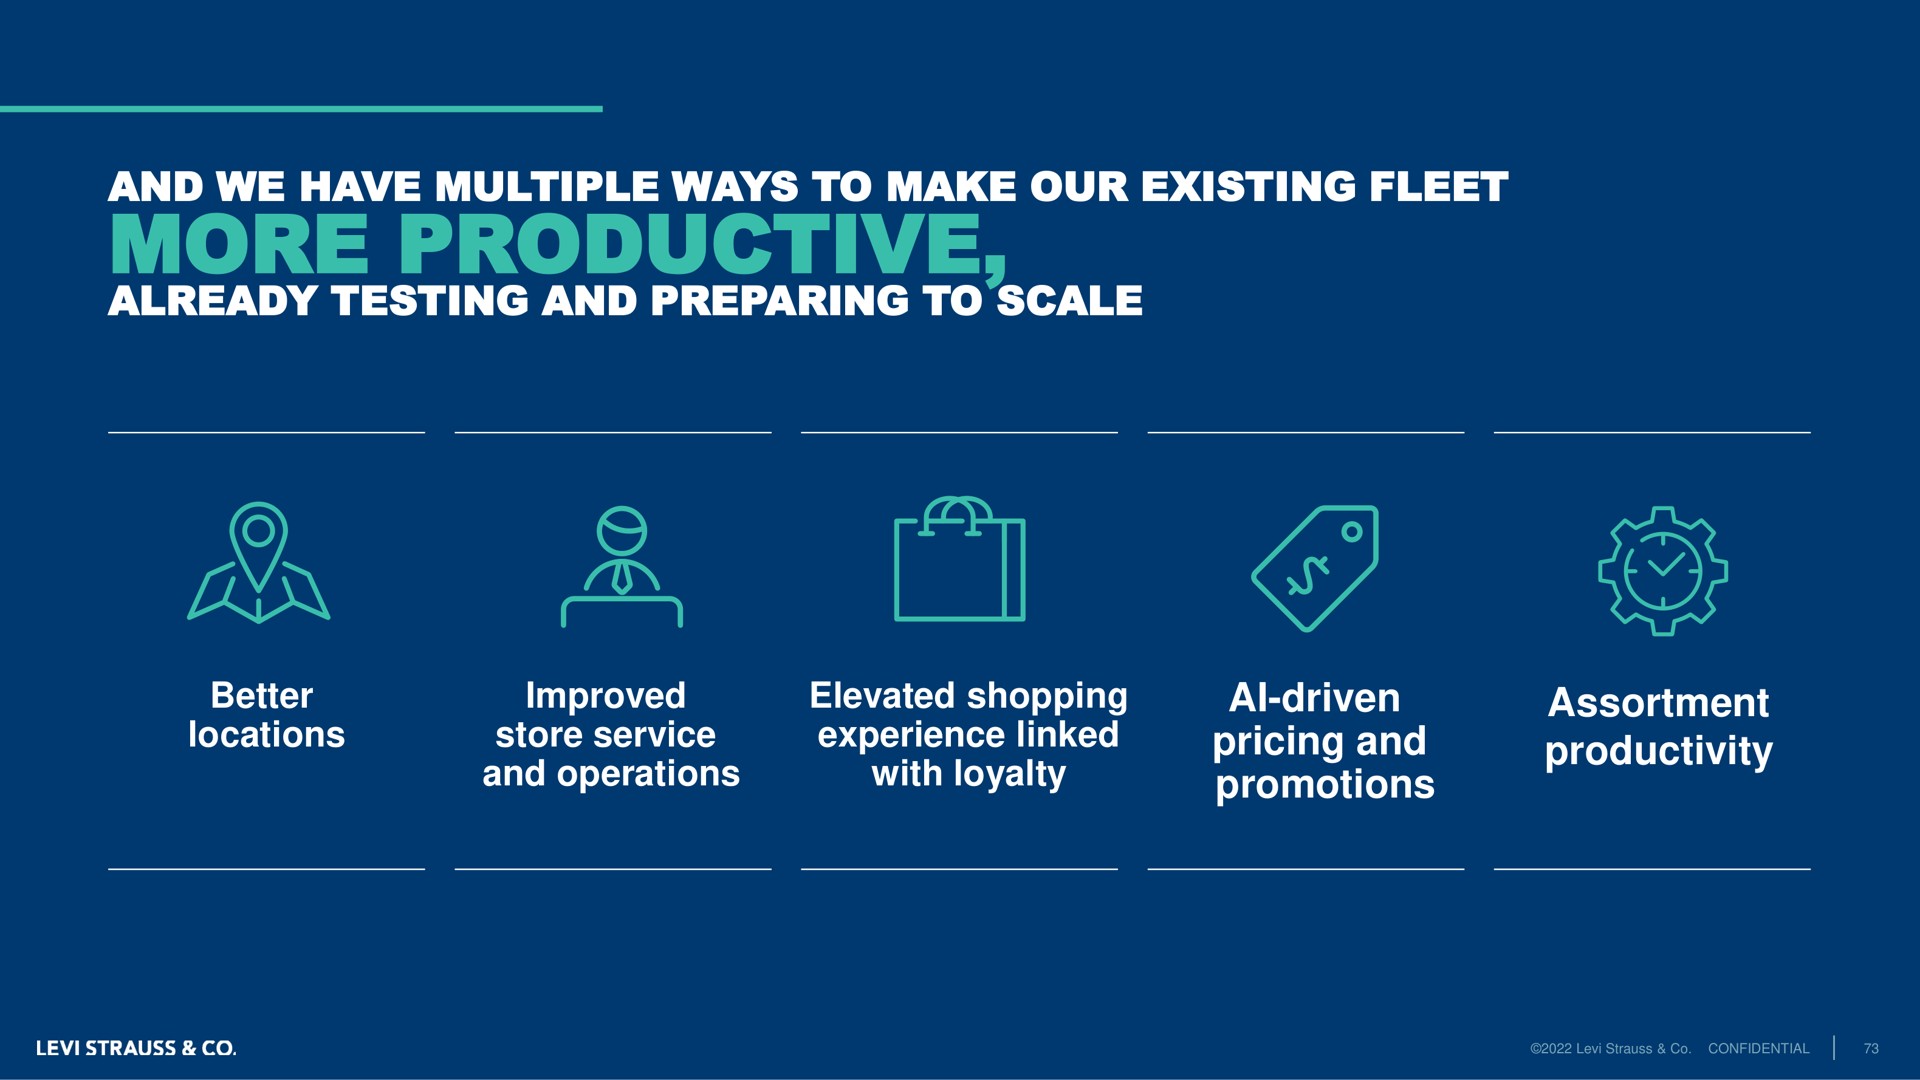 and we have multiple ways to make our existing fleet more productive already testing and preparing to scale driven pricing and promotions assortment productivity elt a a steals locations a improved store service operations elevated shopping experience linked with loyalty driven | Levi Strauss